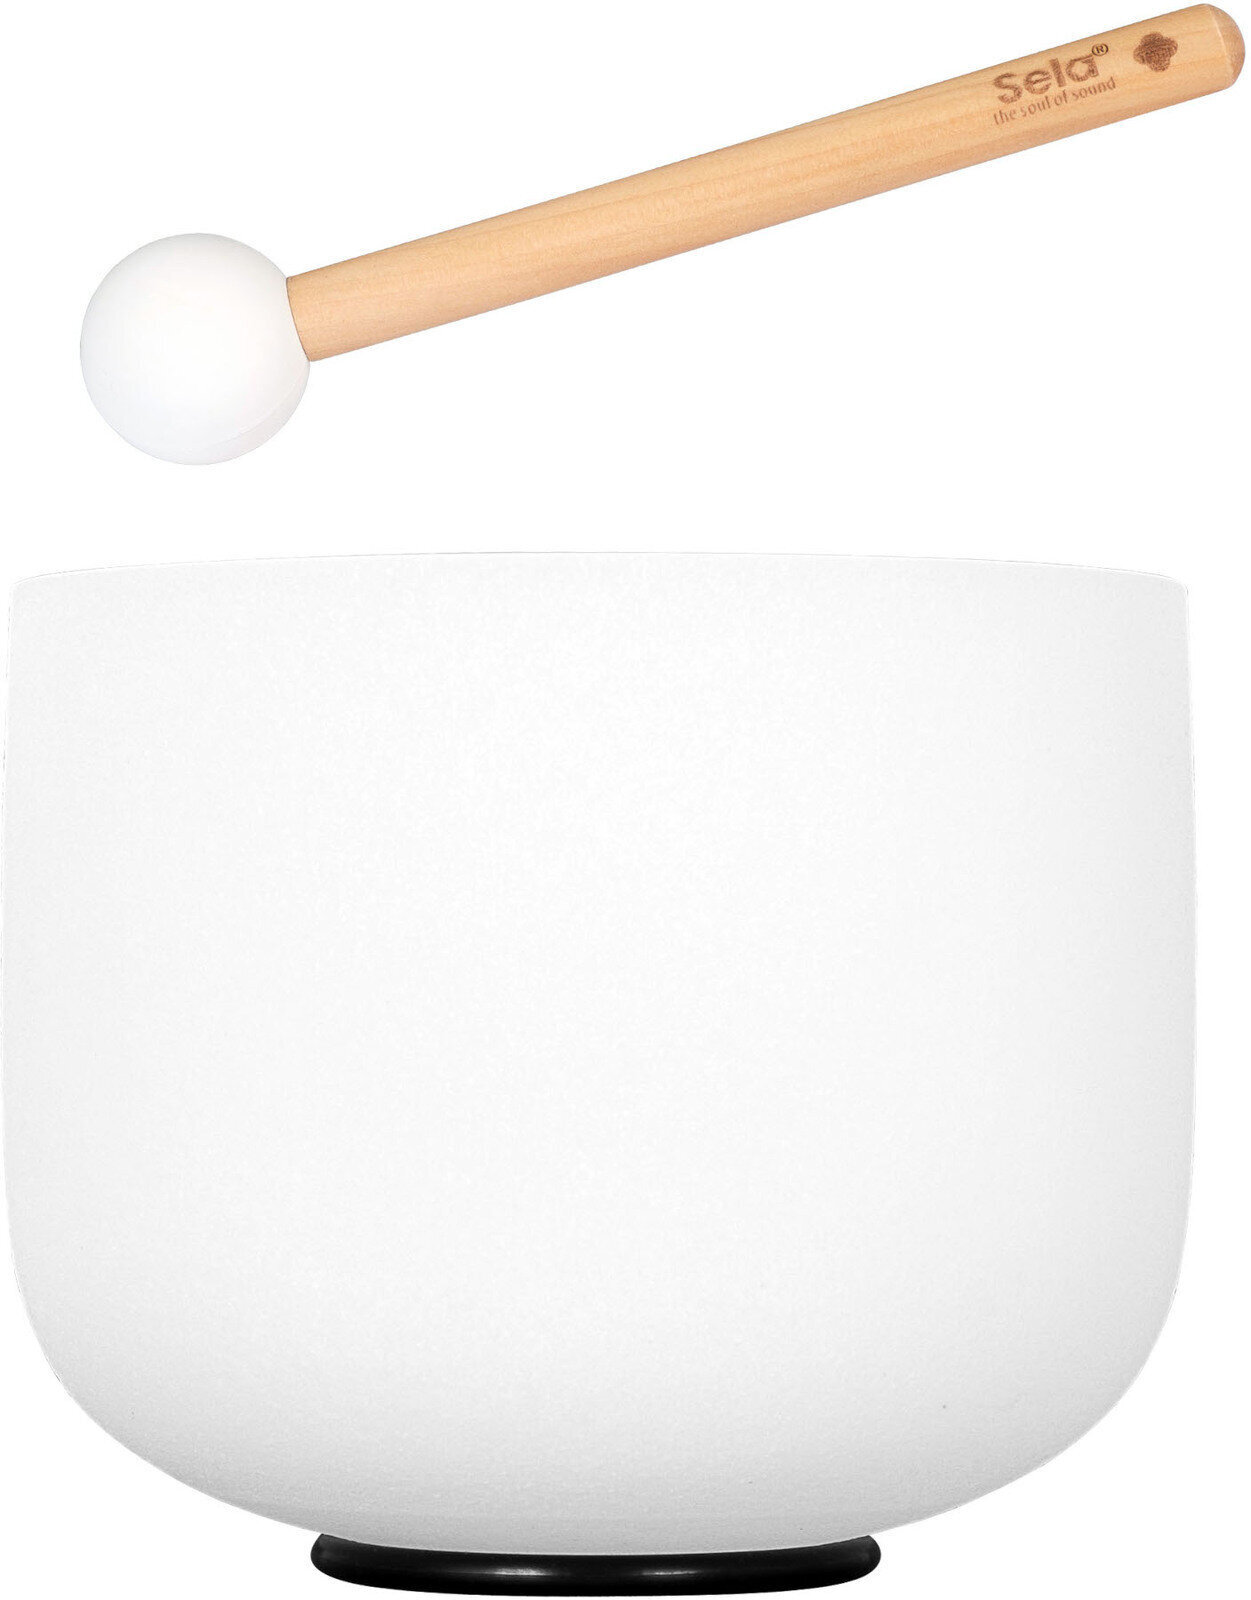 Percussions musicothérapeutiques Sela 10" Crystal Singing Bowl Frosted 432 Hz D incl. 1 Wood Mallet